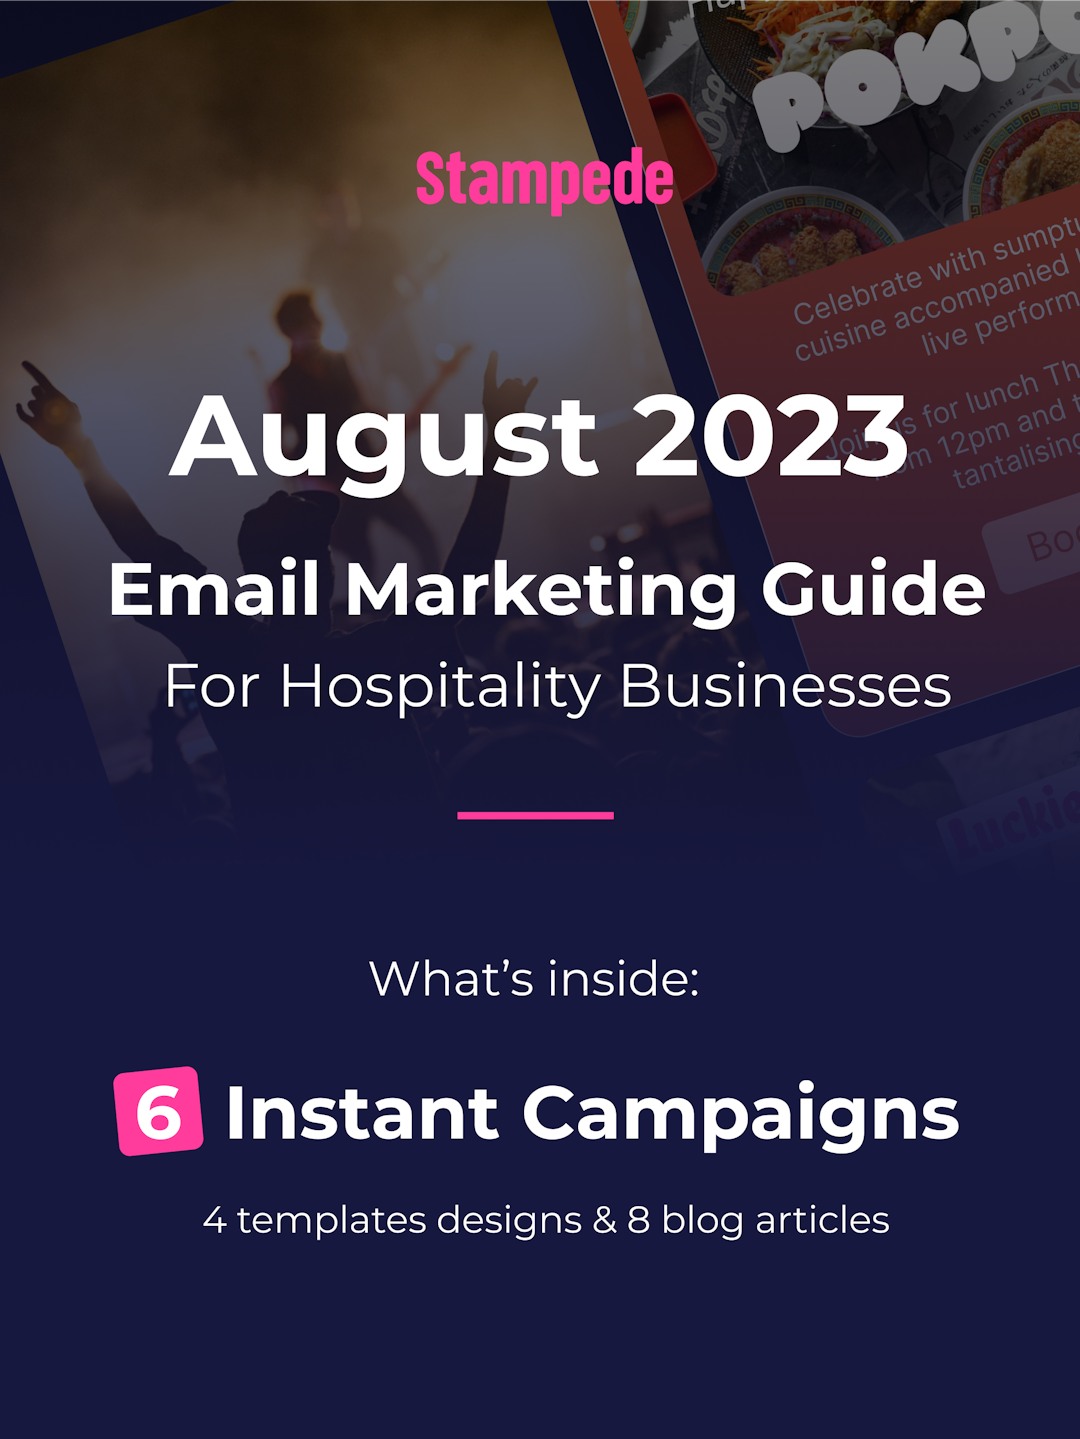 August 2023 Email Marketing Guide